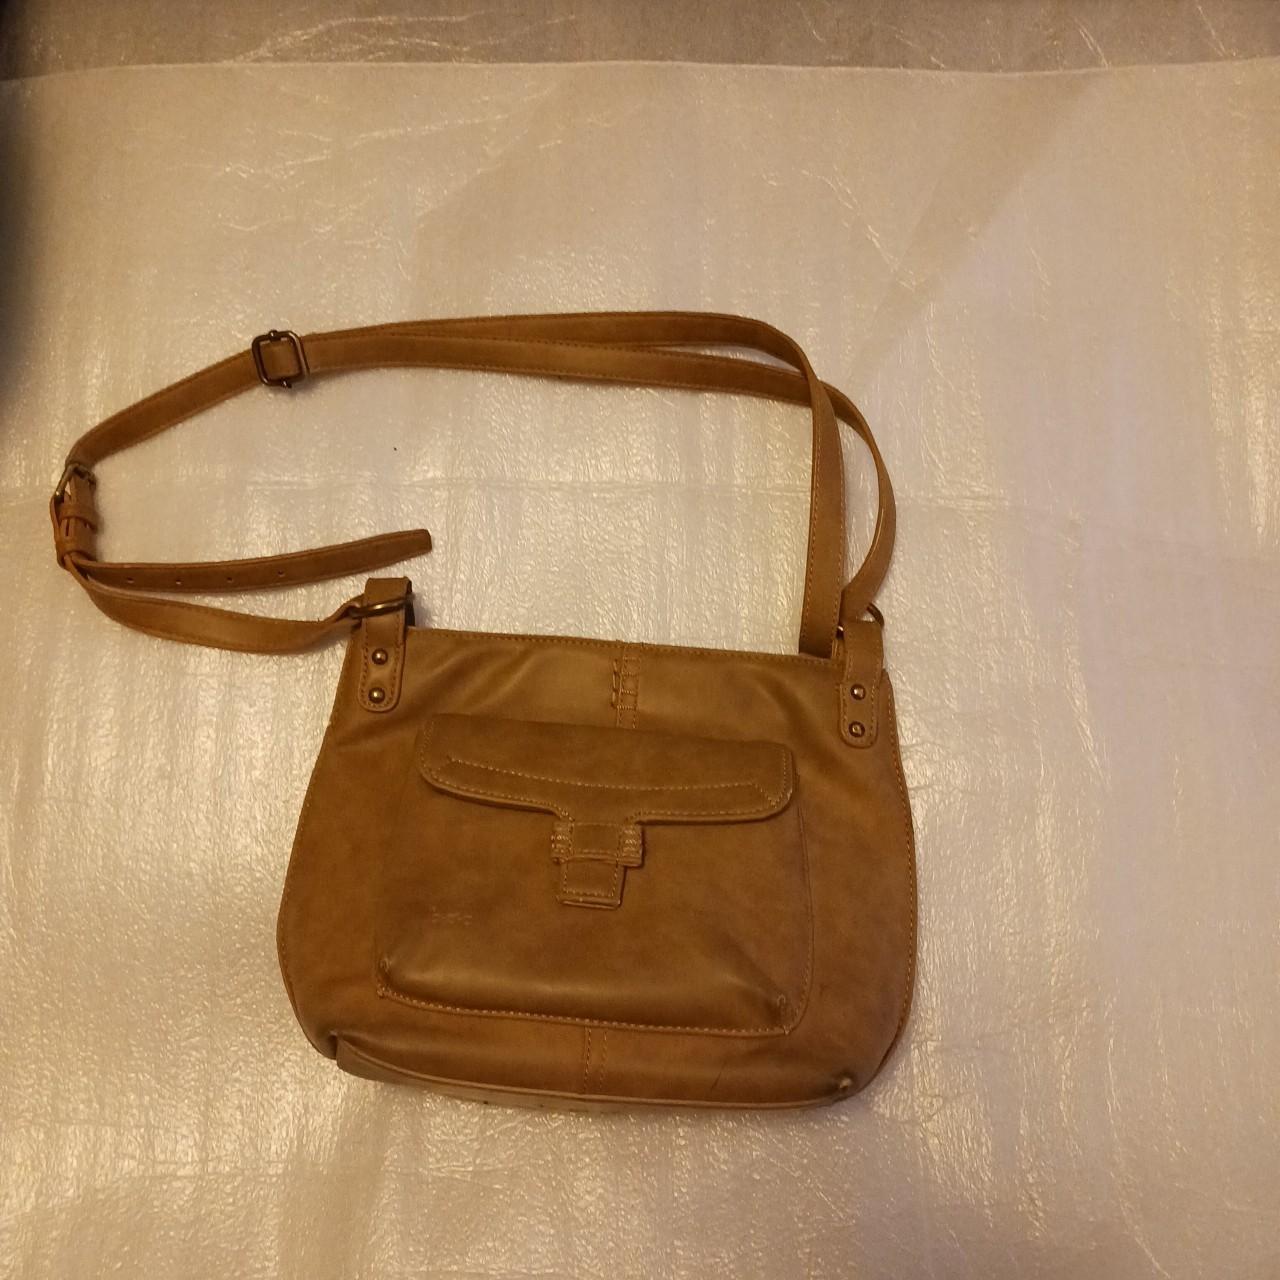 Product Image 1 - Great leather bag goes with